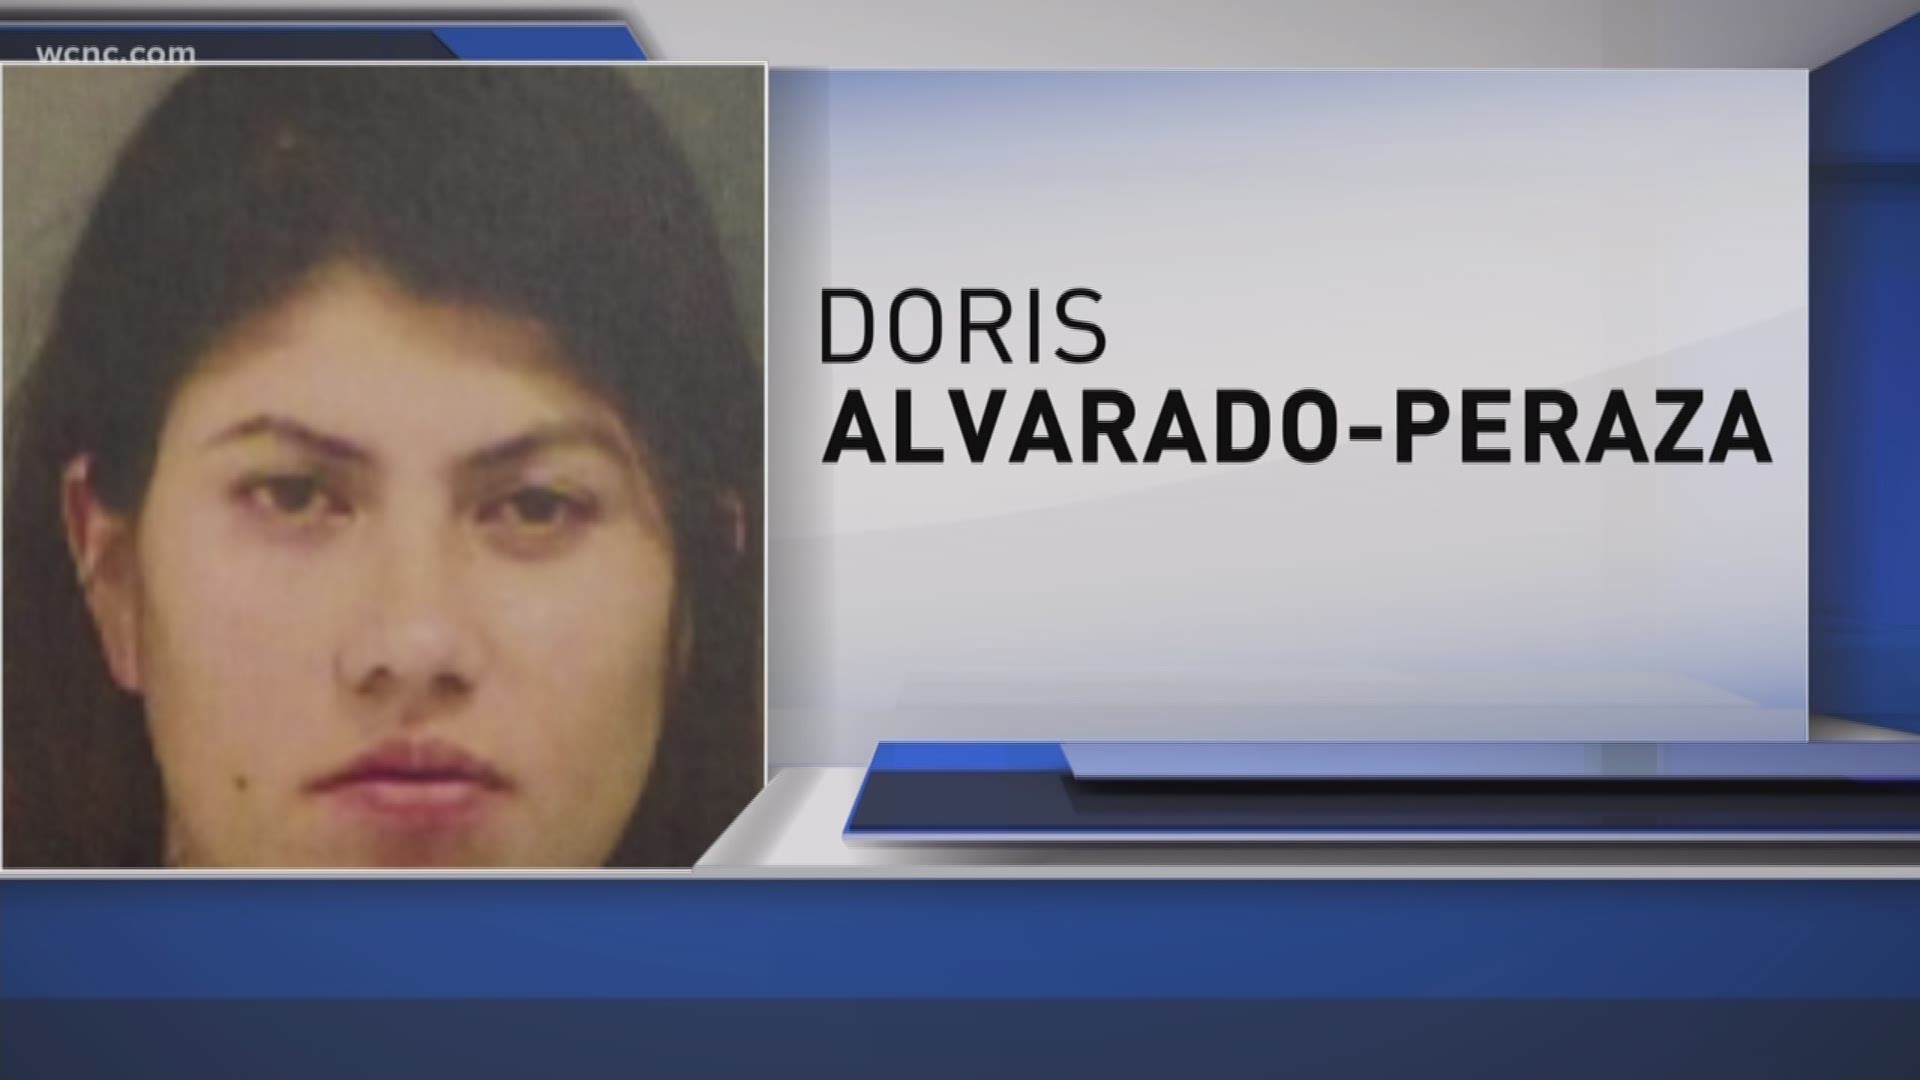 Doris Alvarado-Peraza is wanted in connection with the homicide death of 28-year-old Miguel Angel Valle Romero. Anyone with information on the incident or Alvarado-Peraza is asked to call 911 or Crimestoppers at 704-861-8000.